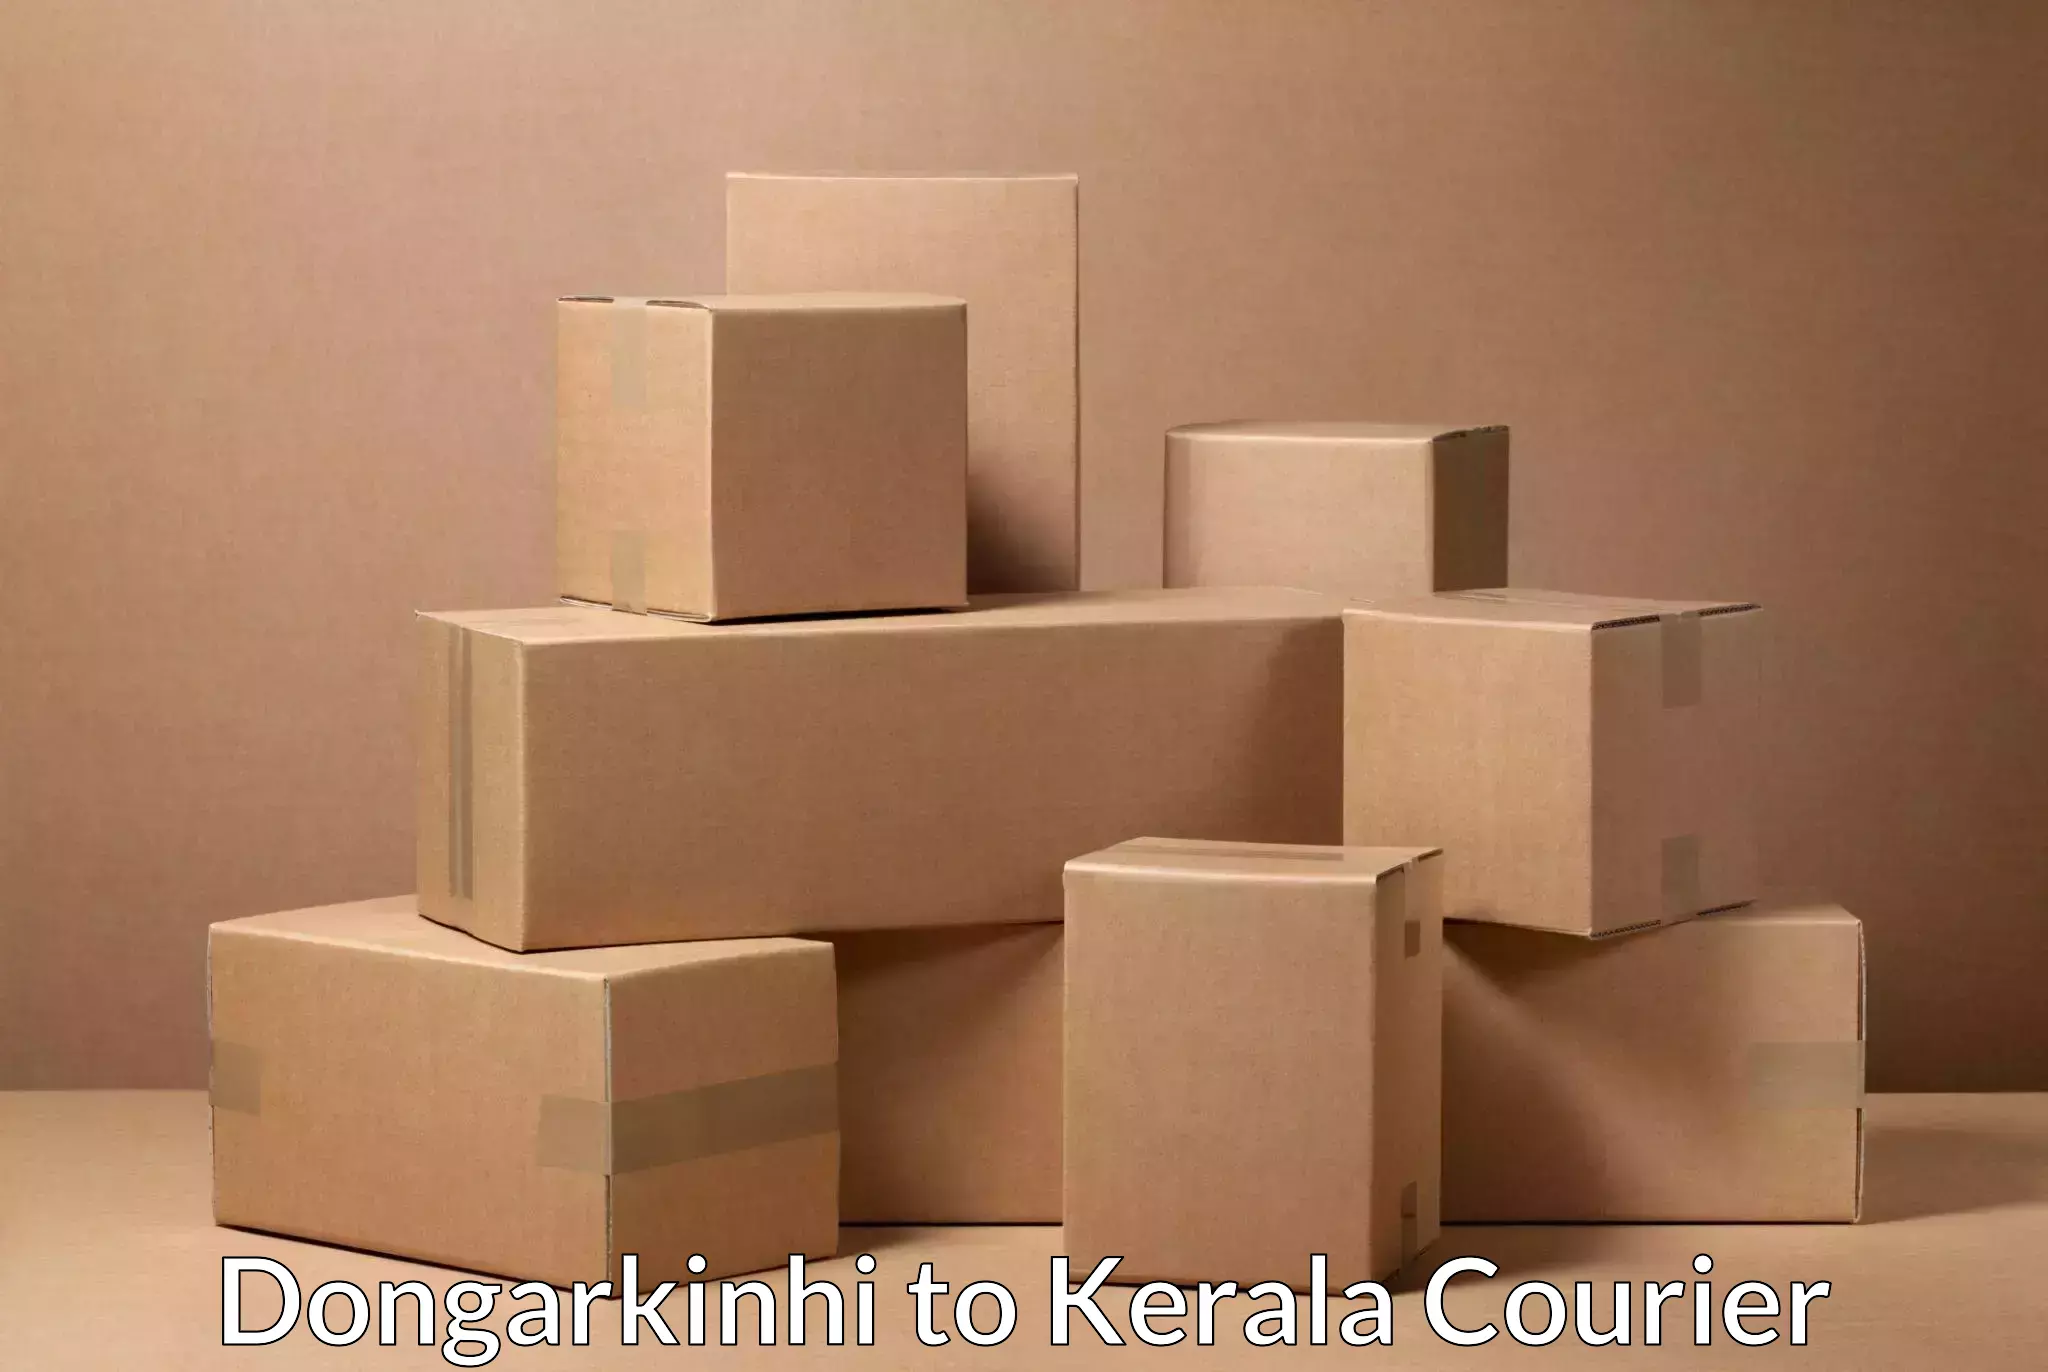 Flexible delivery scheduling Dongarkinhi to Kerala